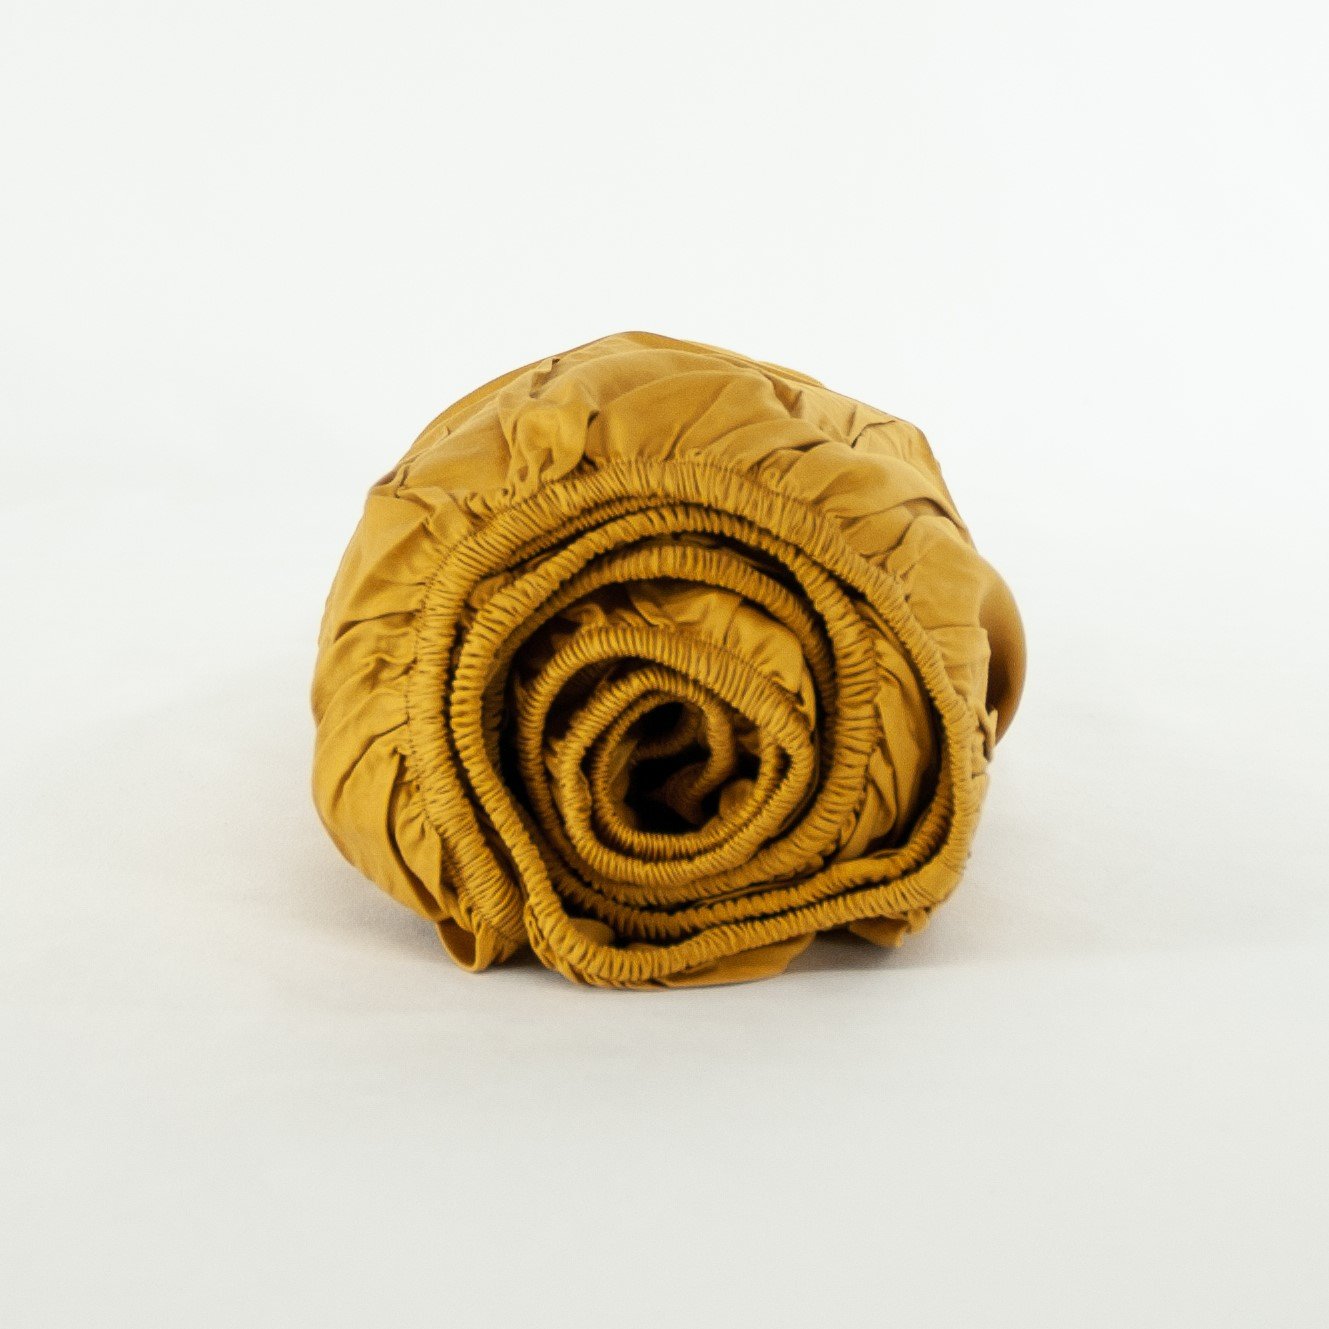 Rolled up organic cotton fitted cot sheet in honey gold